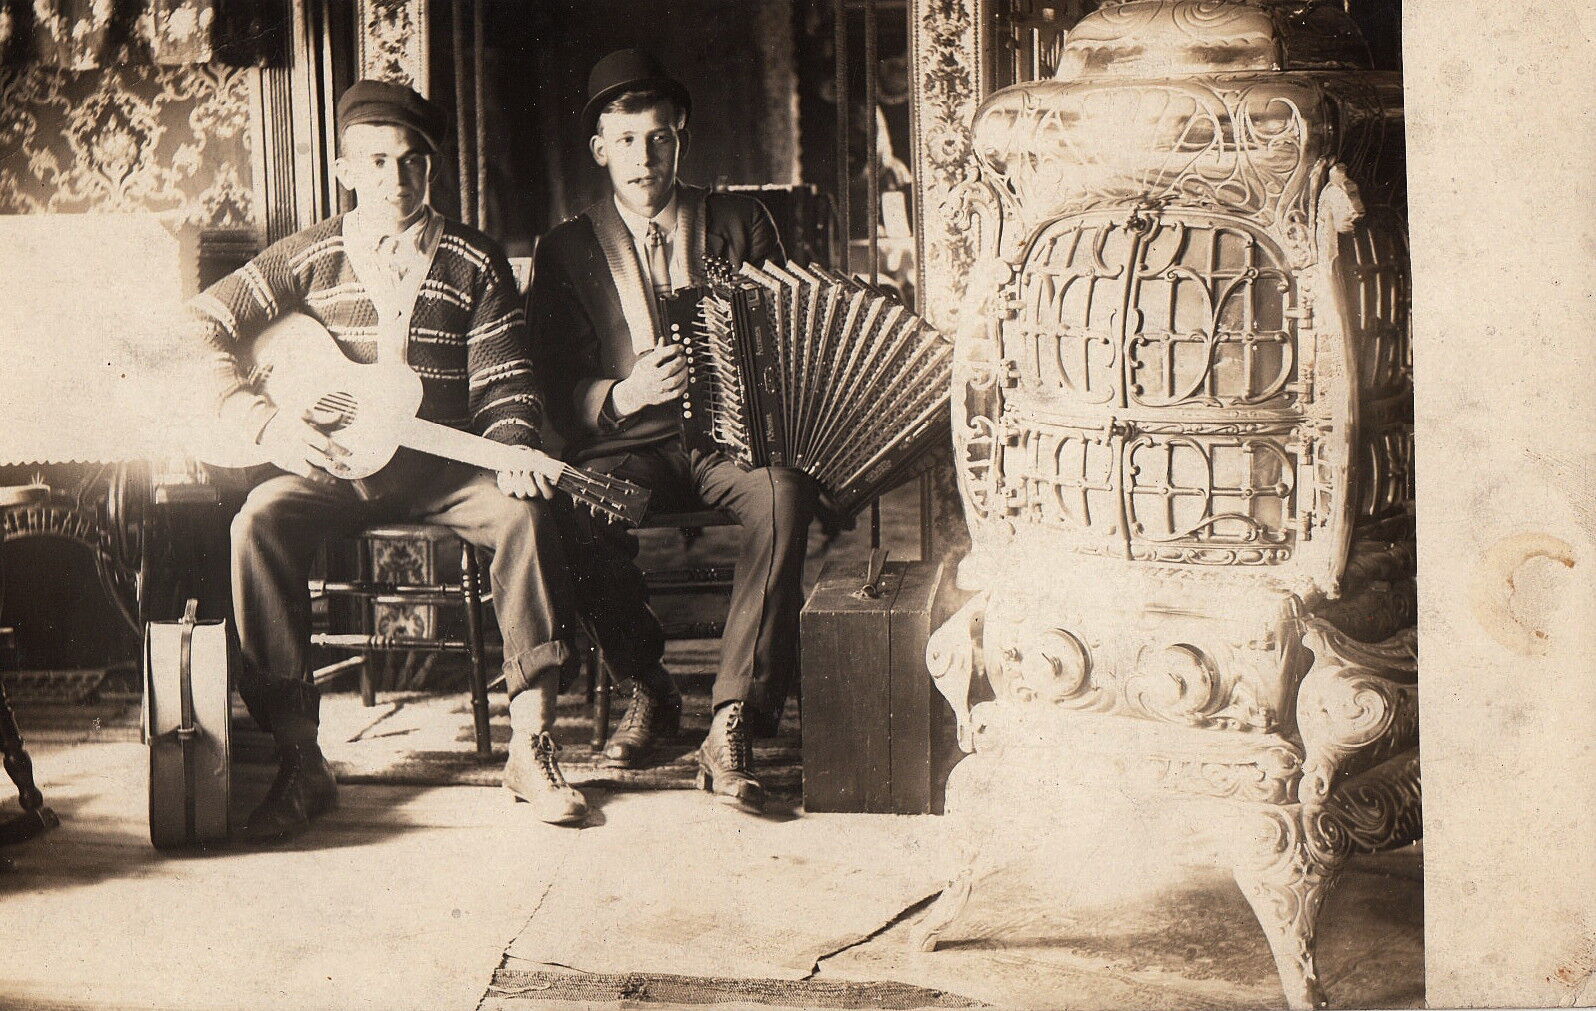 EARLY ACCORDION AND GUITAR PLAYERS ~ c. - 1912